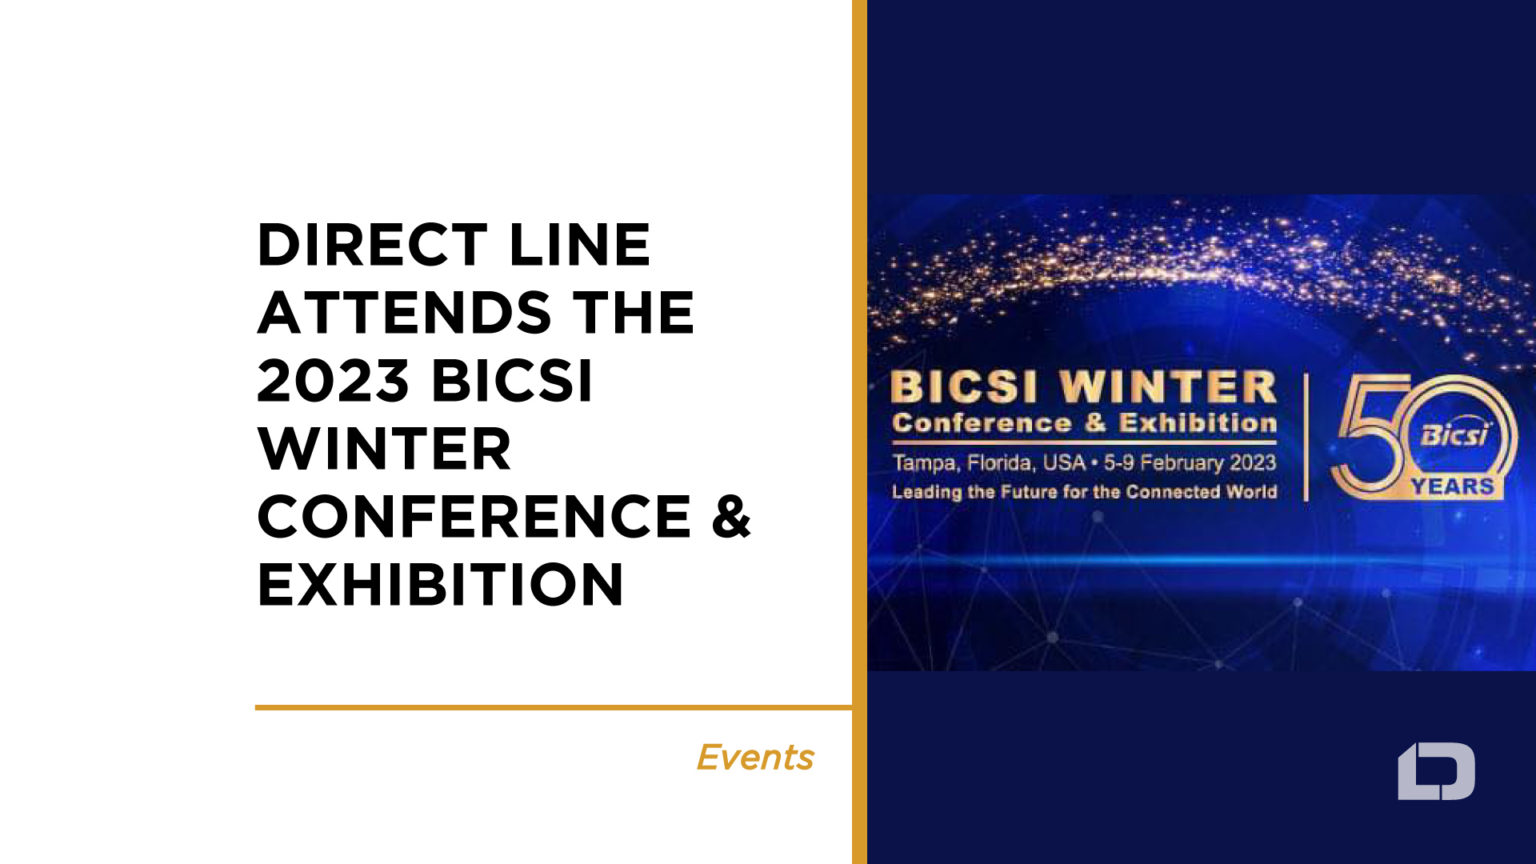 Connect with us at BICSI Winter 2023 Direct Line Global